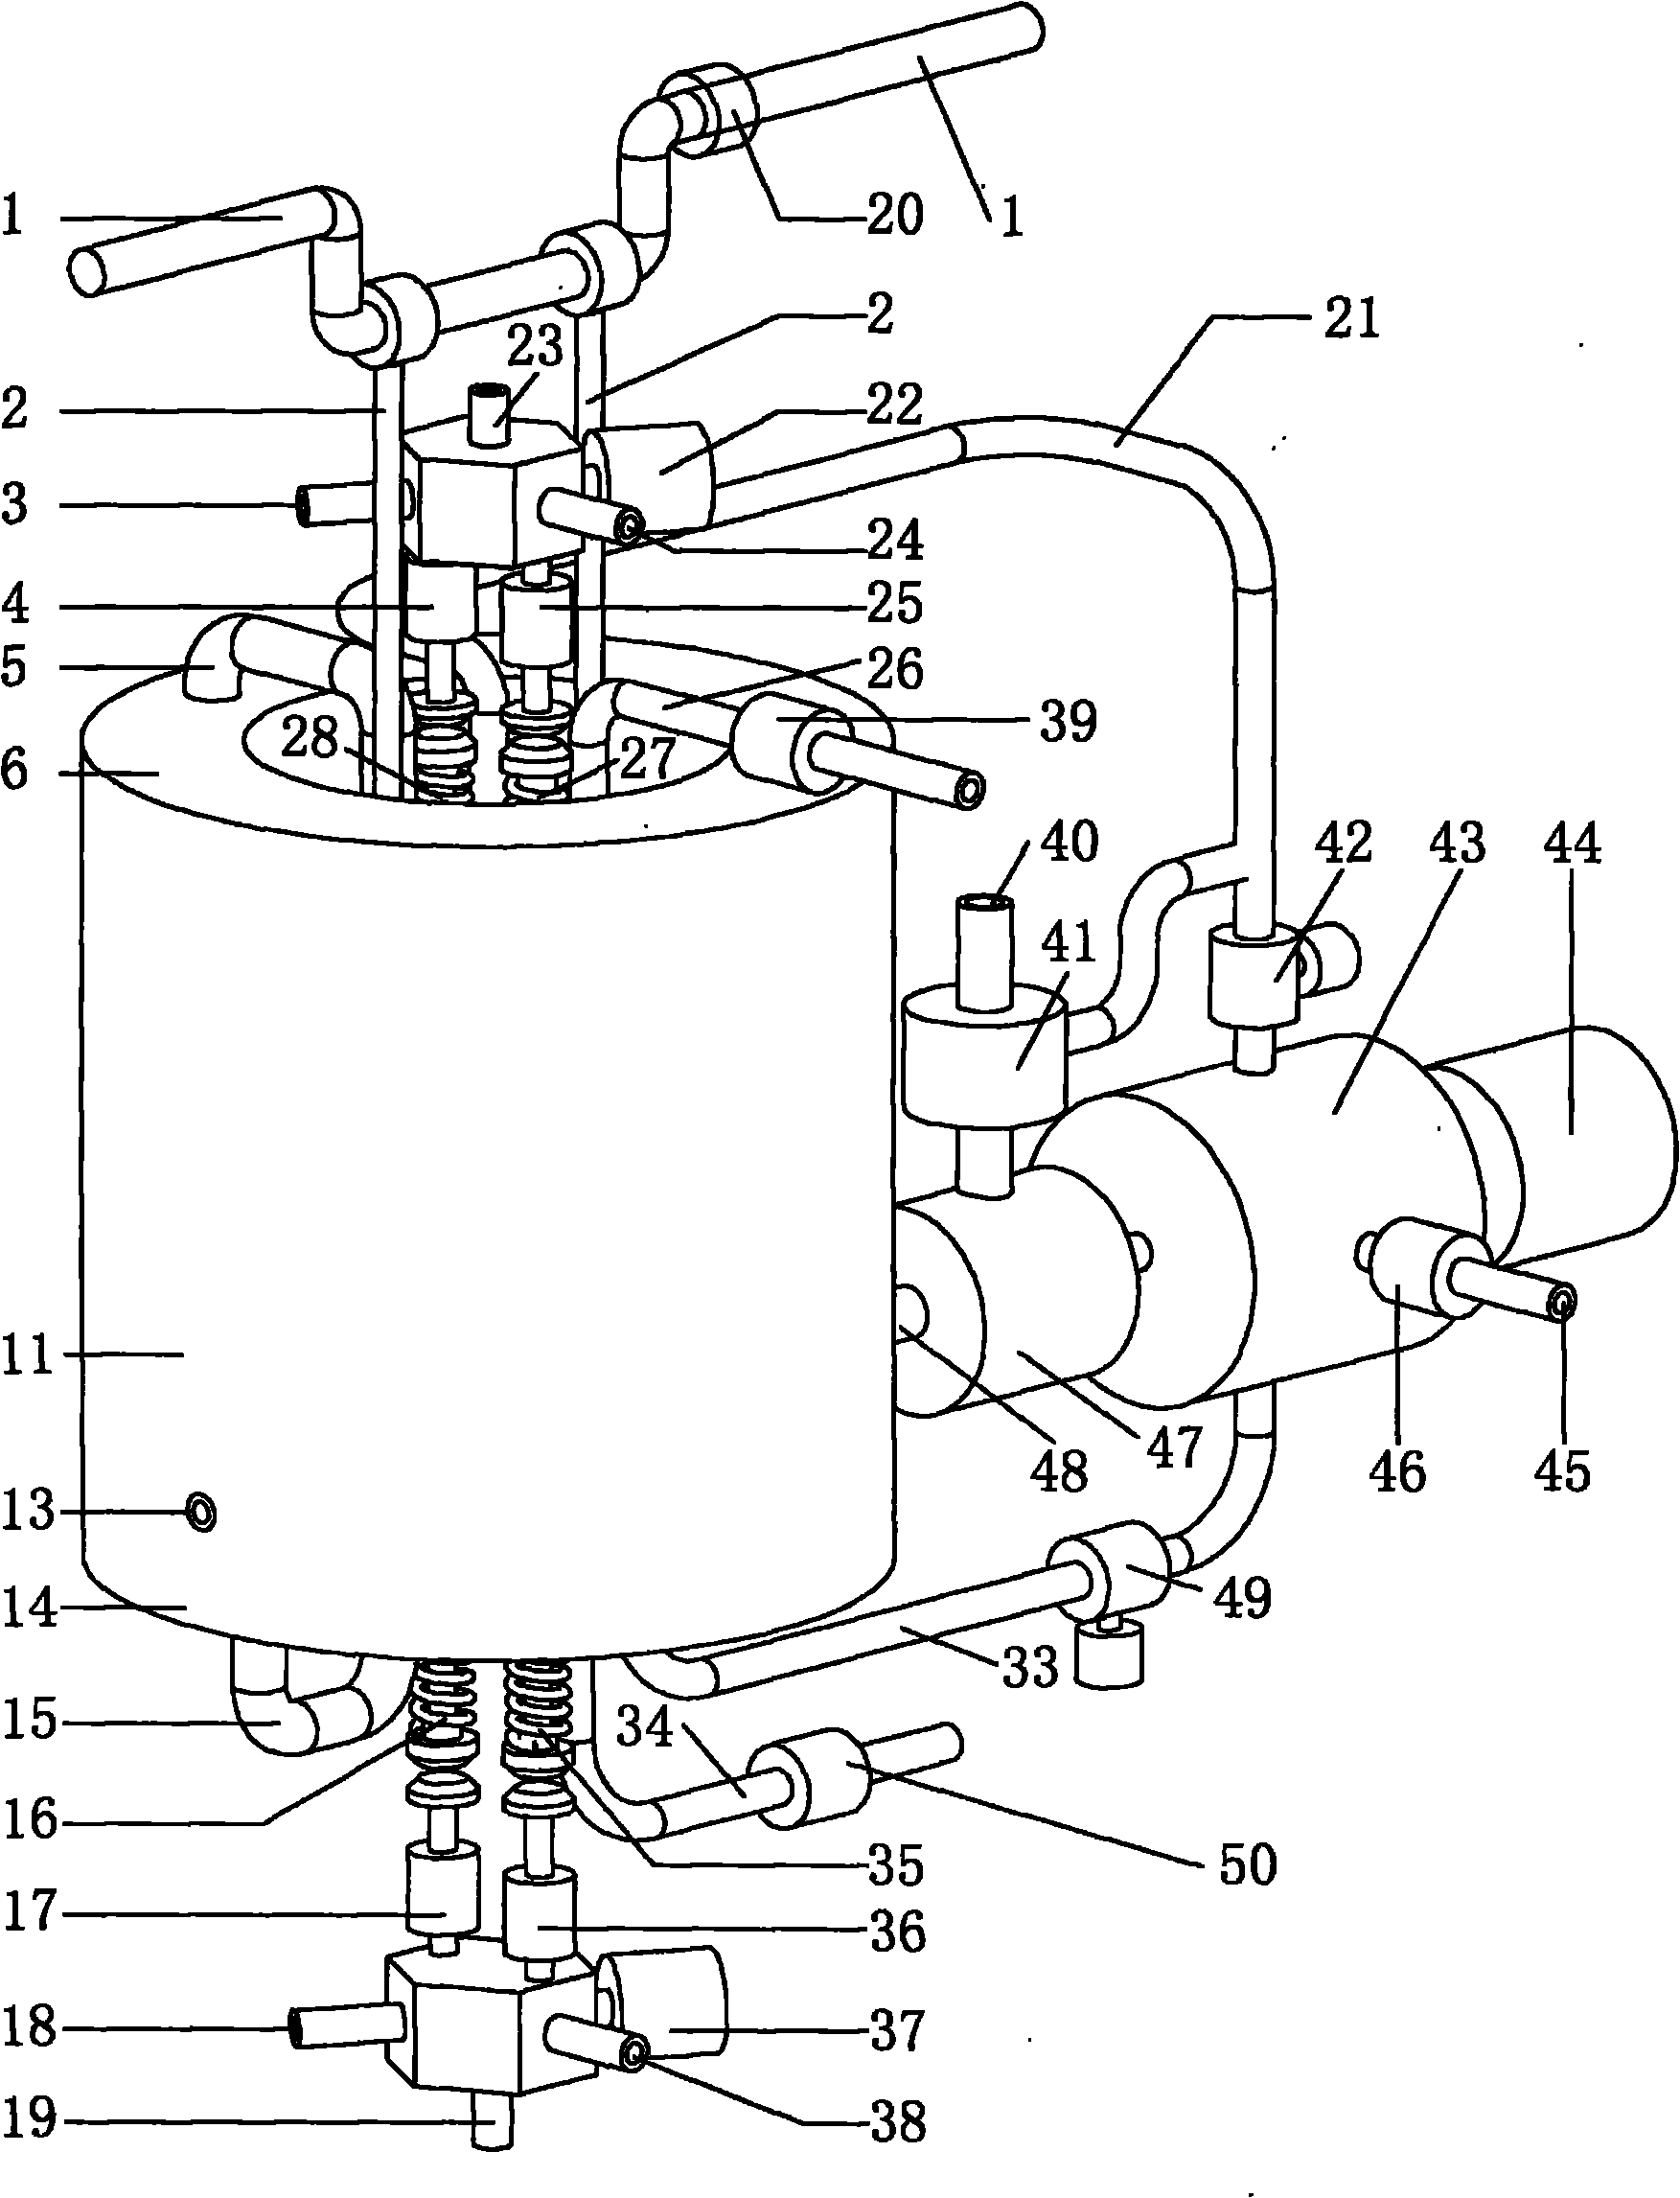 Self-cooling backheating movable cylinder fuel-air engine and Stirling engine